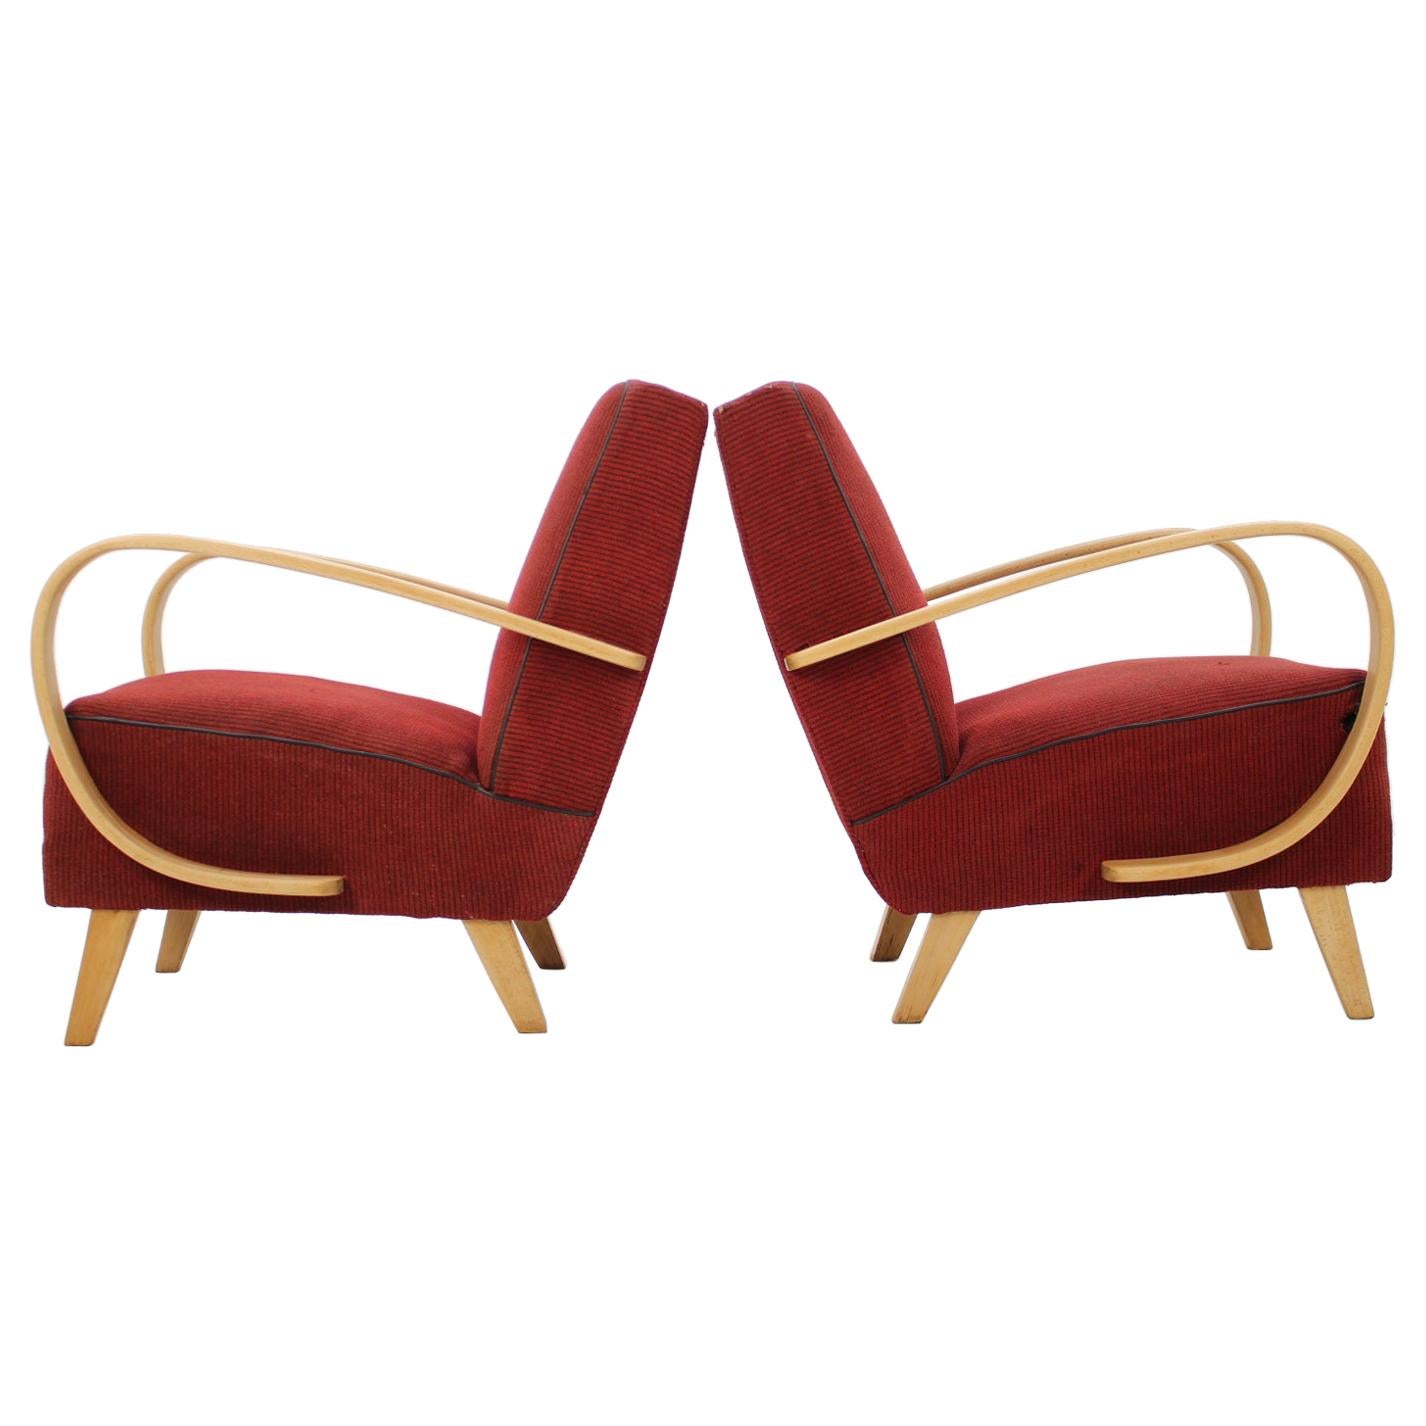 Set of Two Retro Armchairs by Jindřich Halabala, 1950's